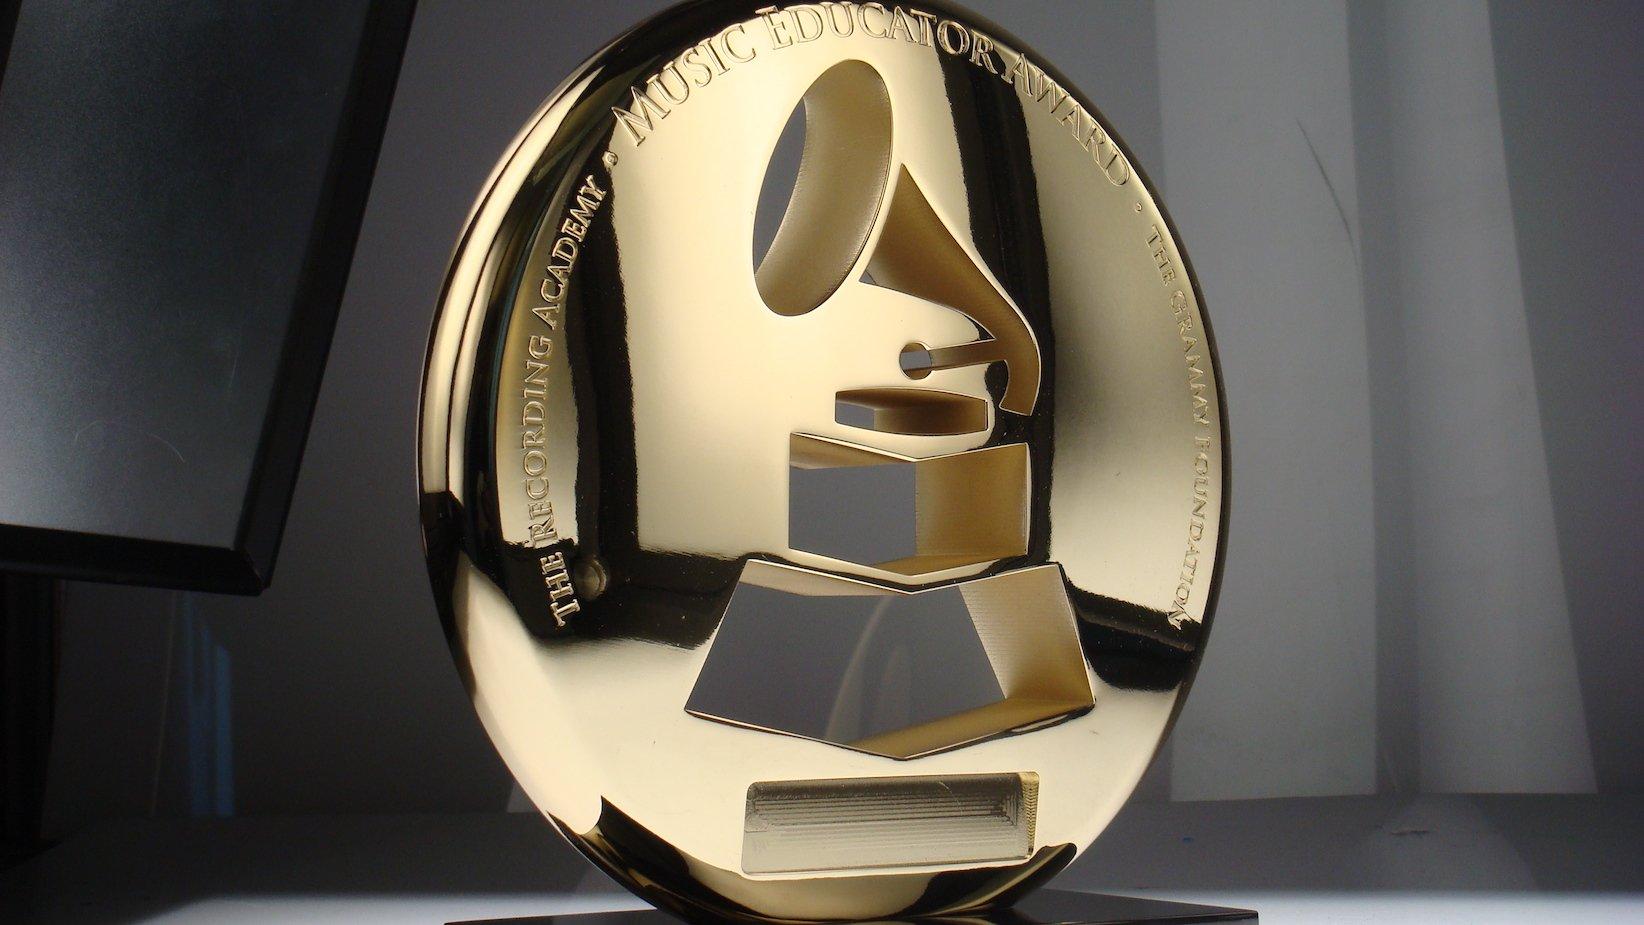 Photo of the Music Educator Award trophy